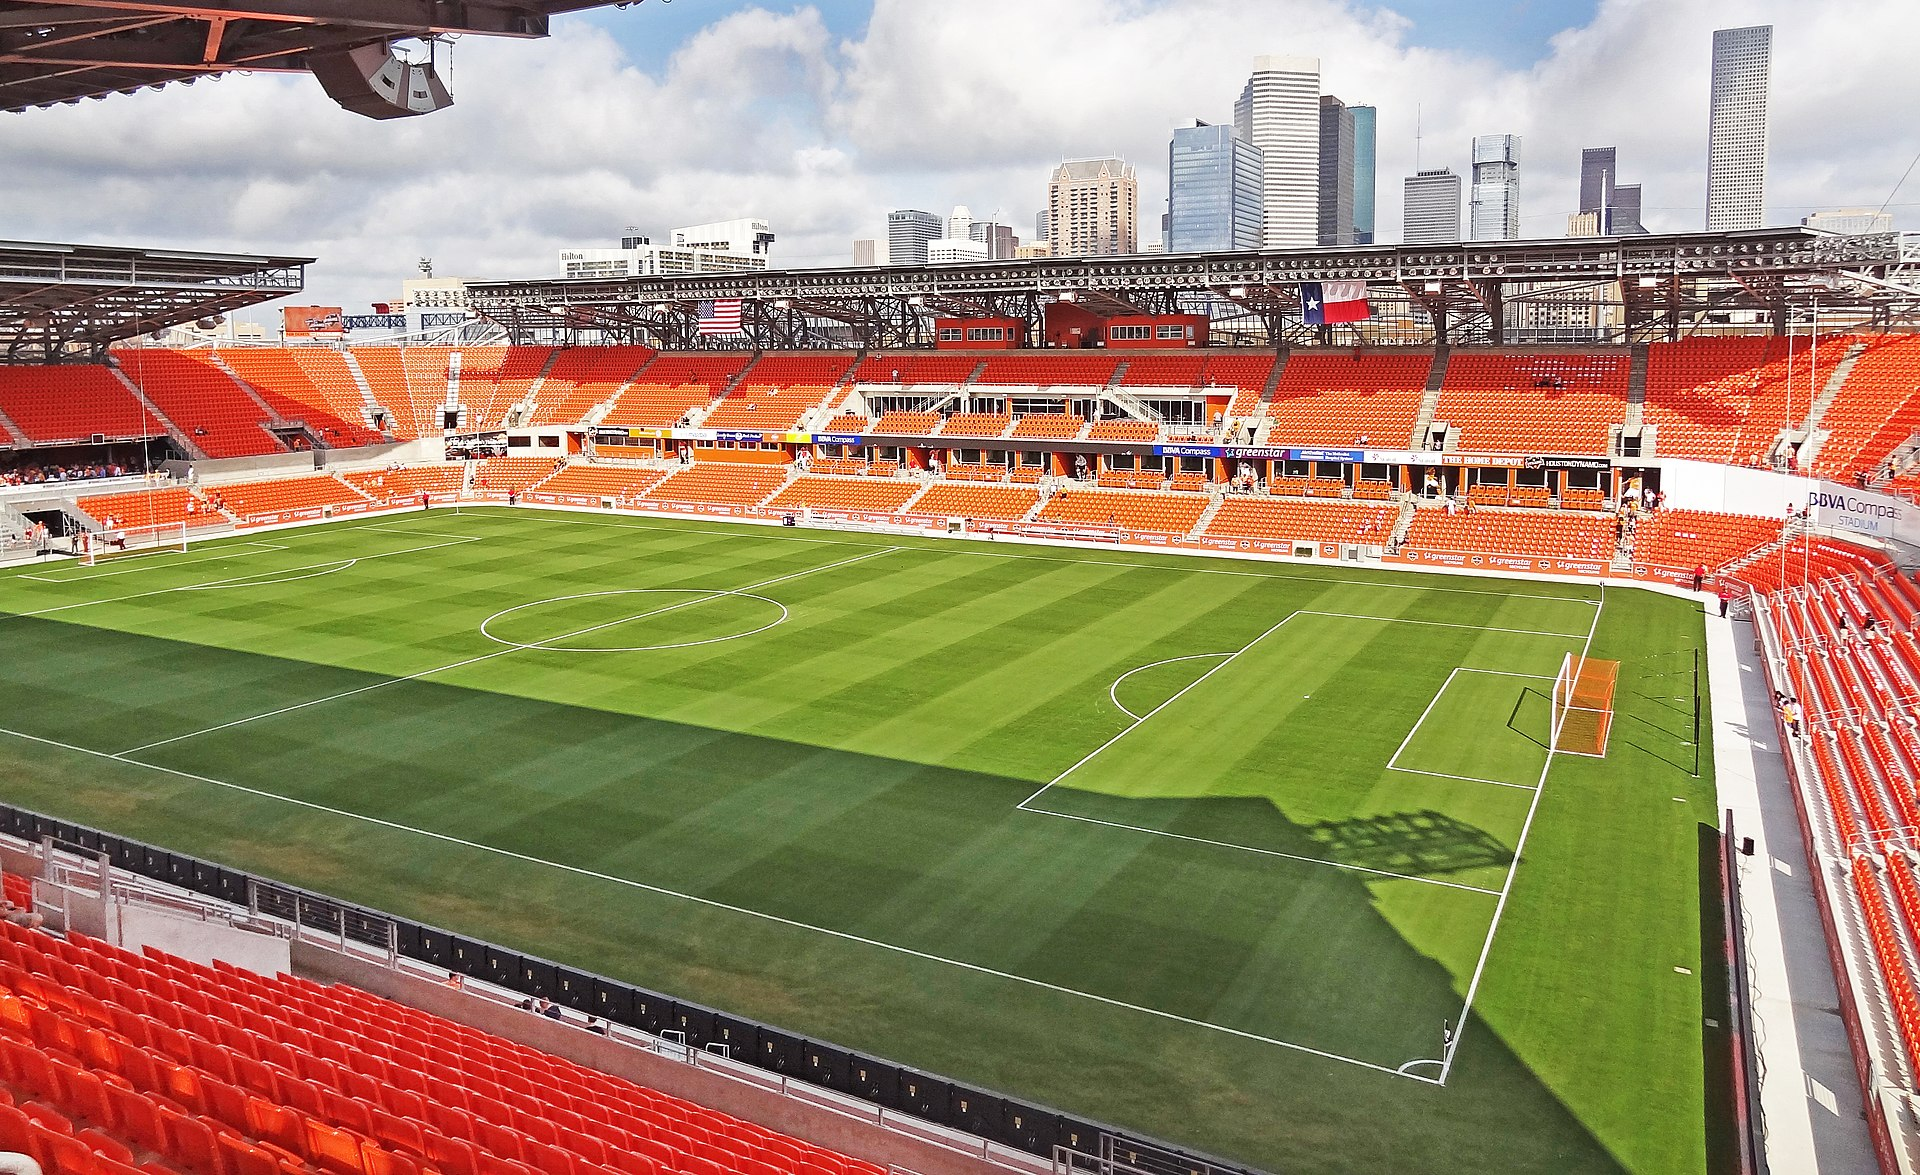 View of Houston Dynamo sports fiend from the top of the stands